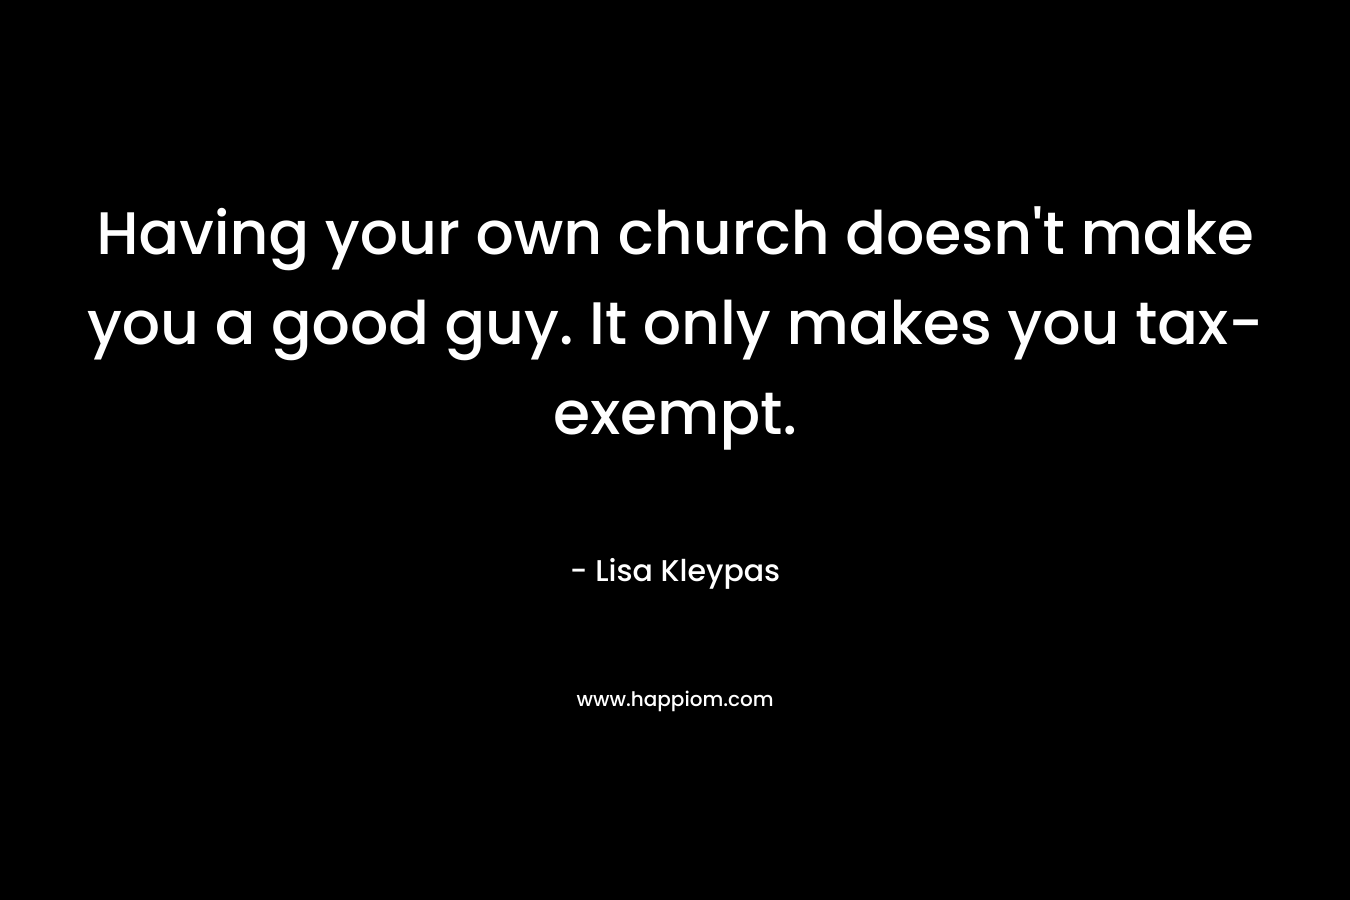 Having your own church doesn't make you a good guy. It only makes you tax-exempt.